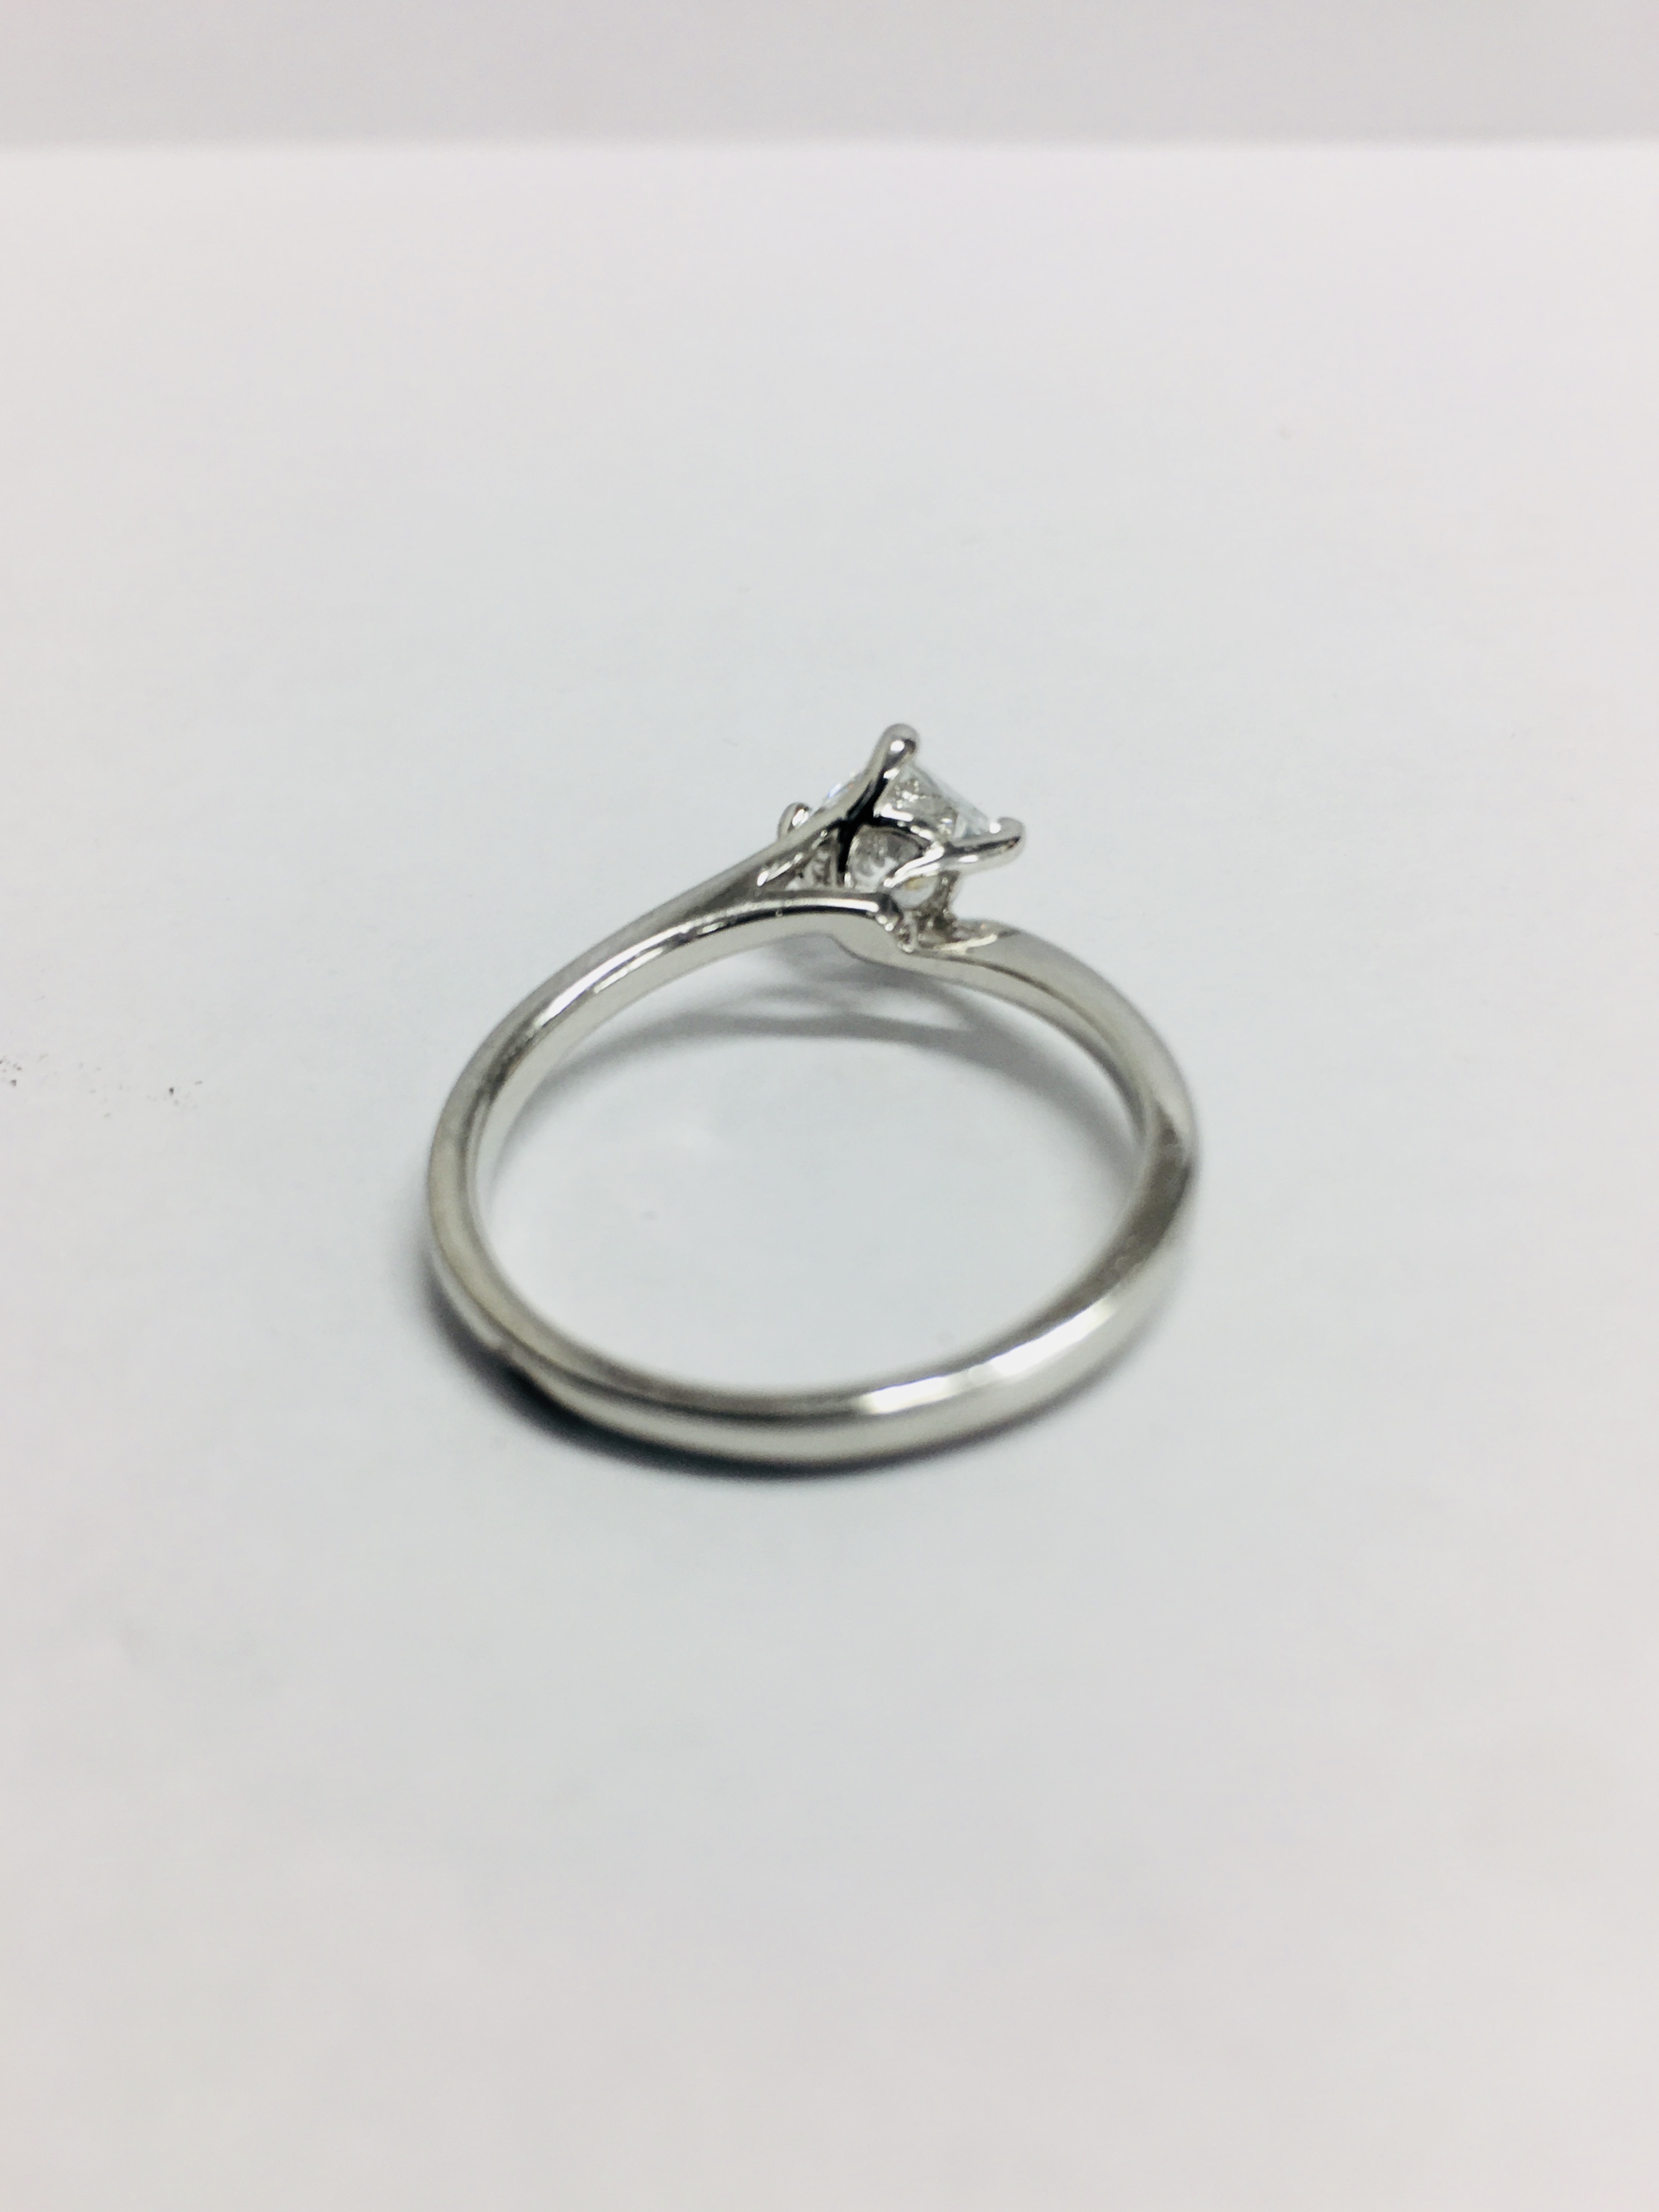 1.02Ct Princess Cut Diamond Solitaire Ring, - Image 5 of 7